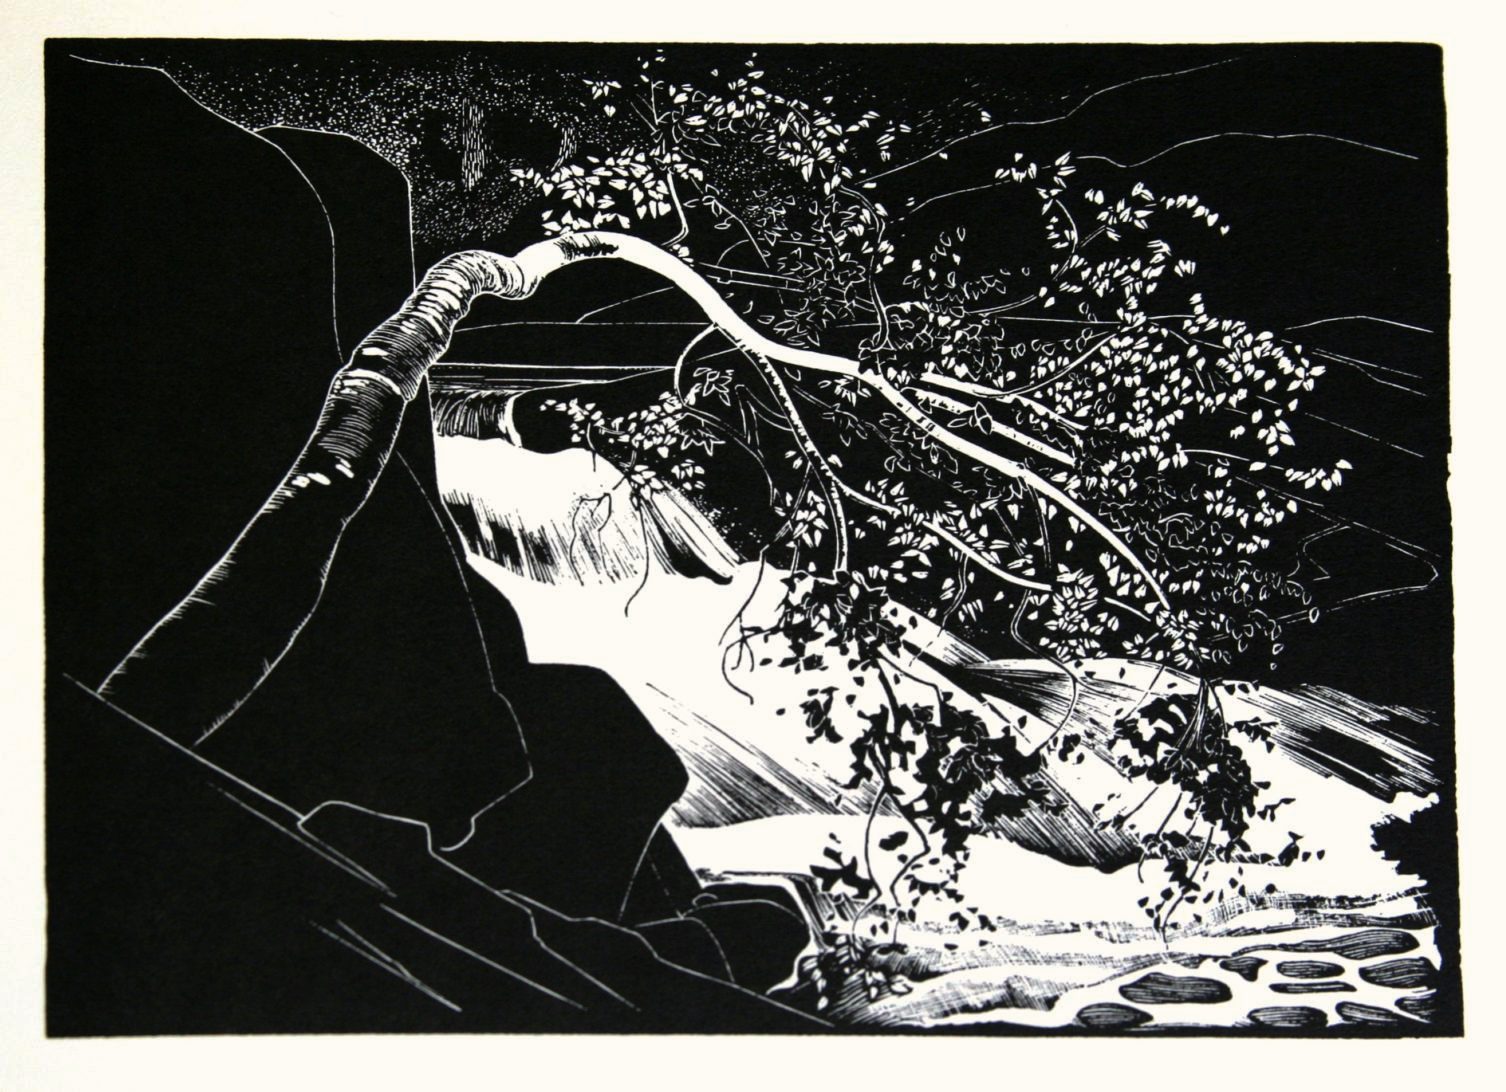 Black and white engraving. Walter J. Phillips (1884-1963). Rushing River, lake of the Woods, 1931. Wood engraving. Edition of 200. 13.9 x 17.1 cm.